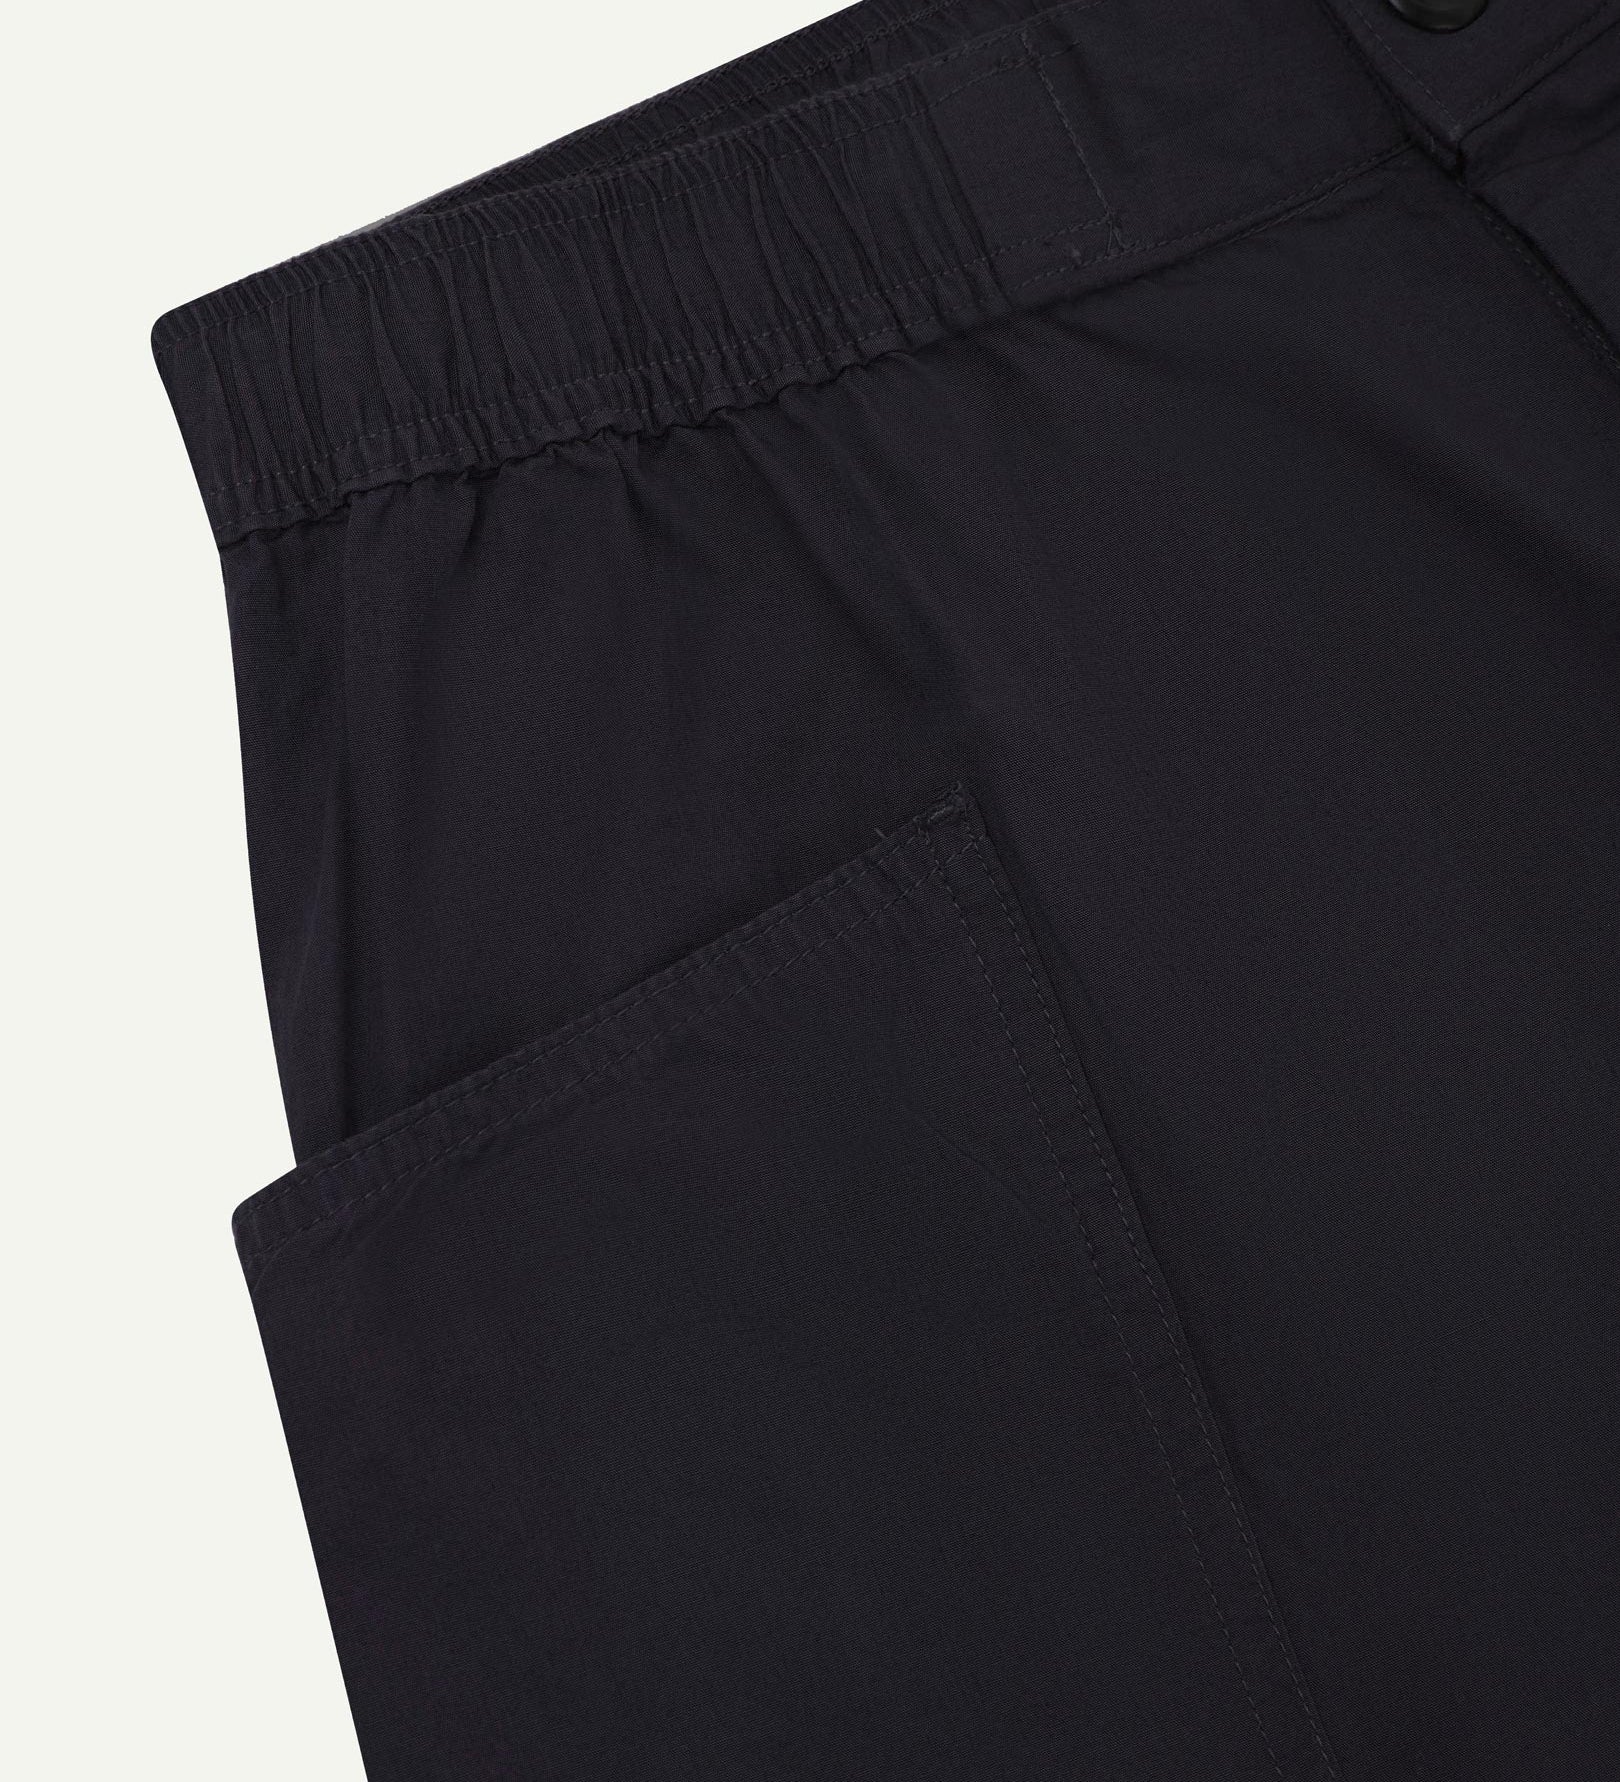 Close-up of the left pocket and stitching of the lightweight organic midnight blue-green cotton shorts.